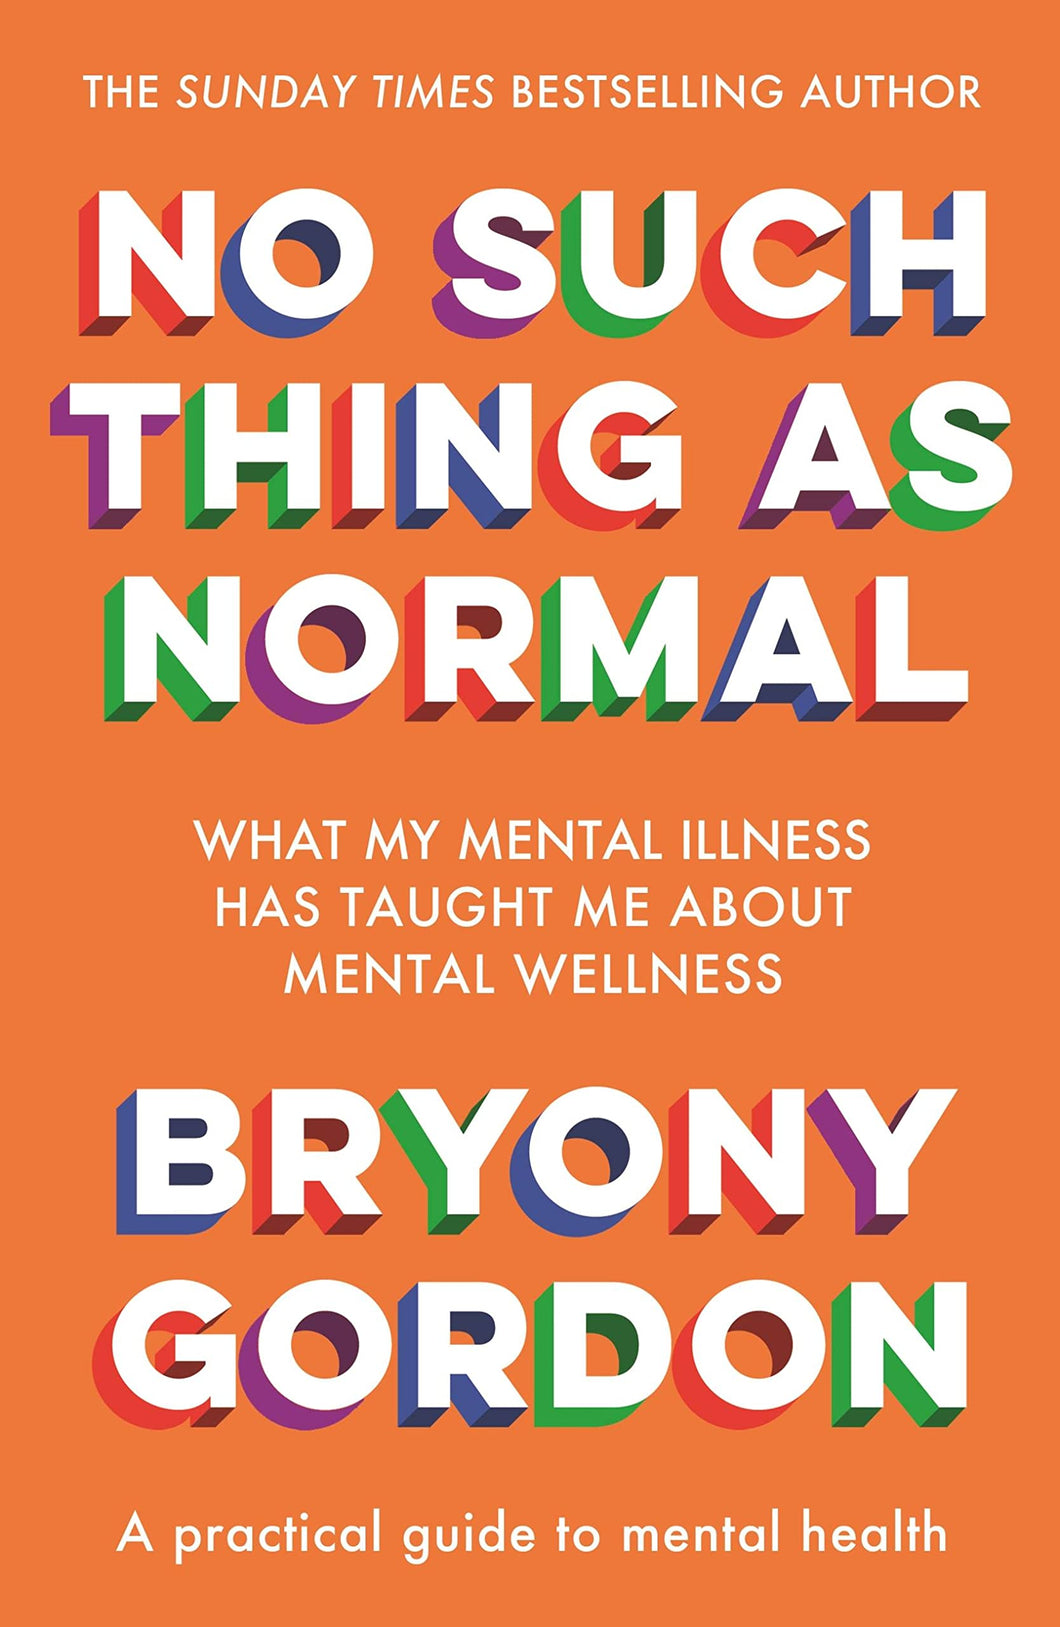 No Such Thing As Normal, Bryony Gordon